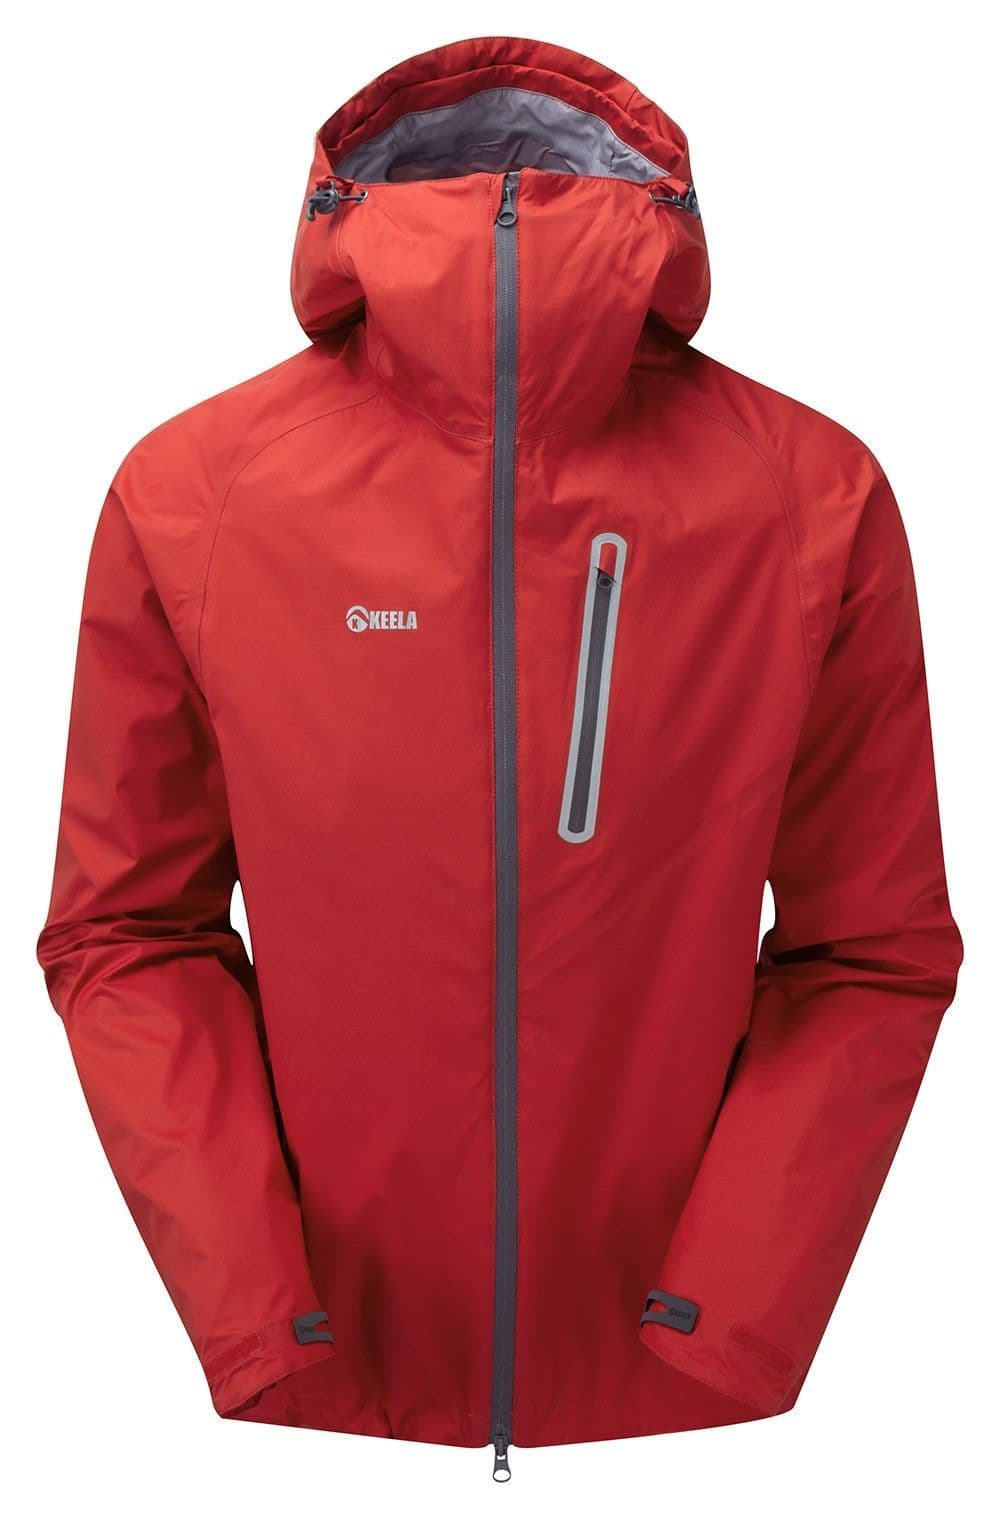 Keela Cairn 3 Layer Shell Jacket - Racing Red